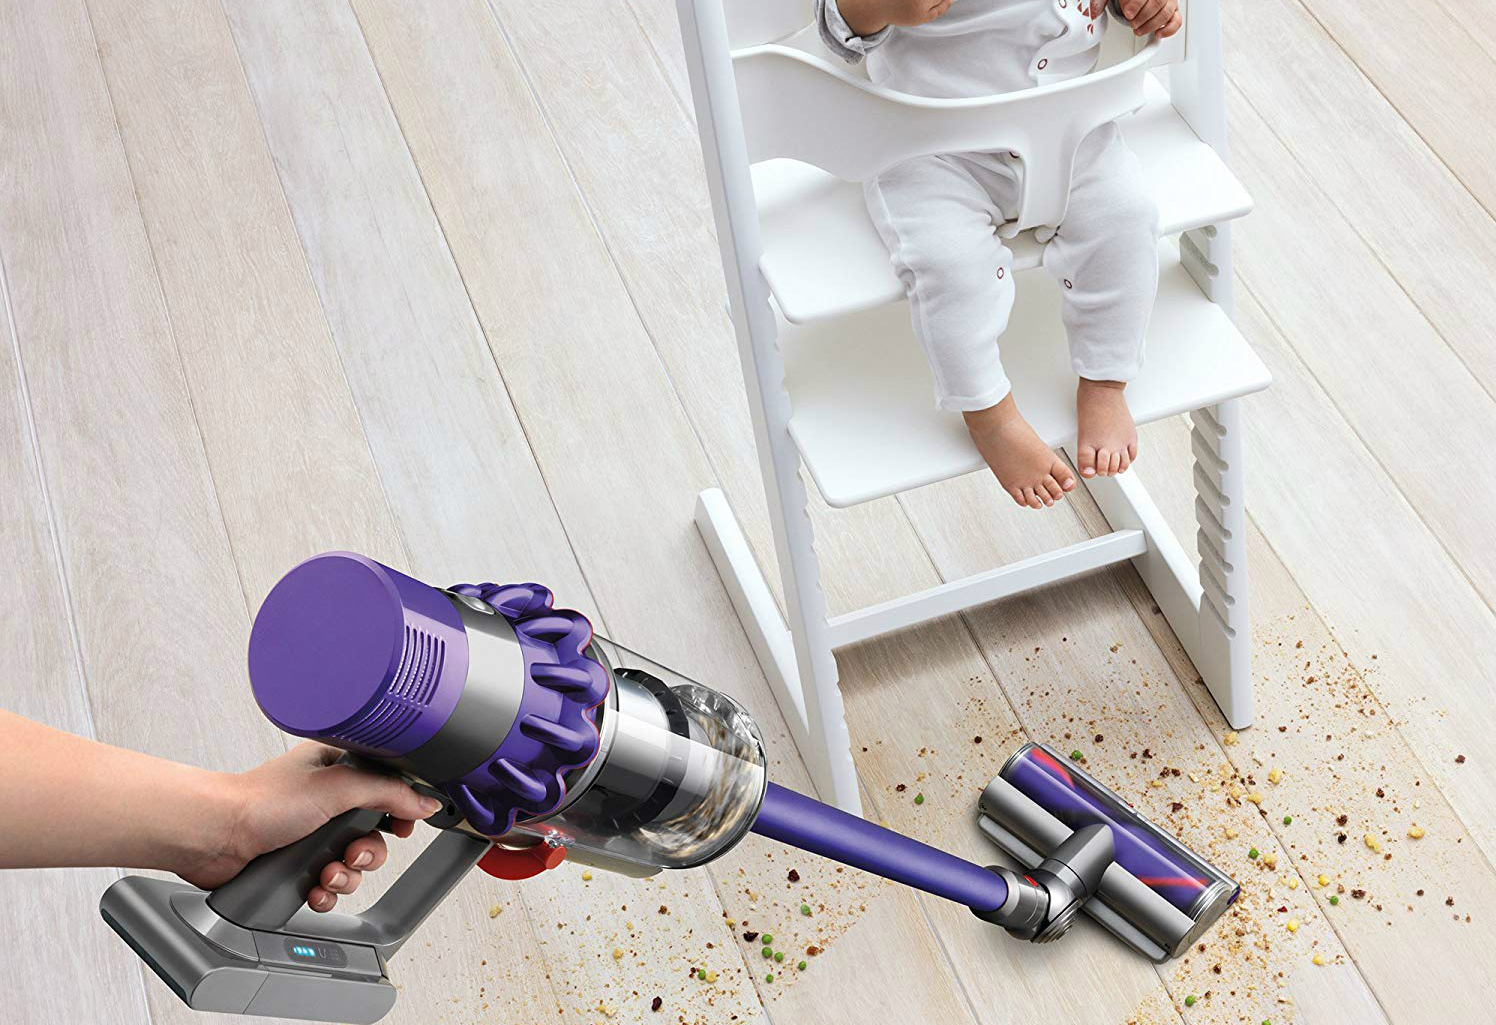 Best Dyson deals for January: save on fans, vacuums | Digital Trends